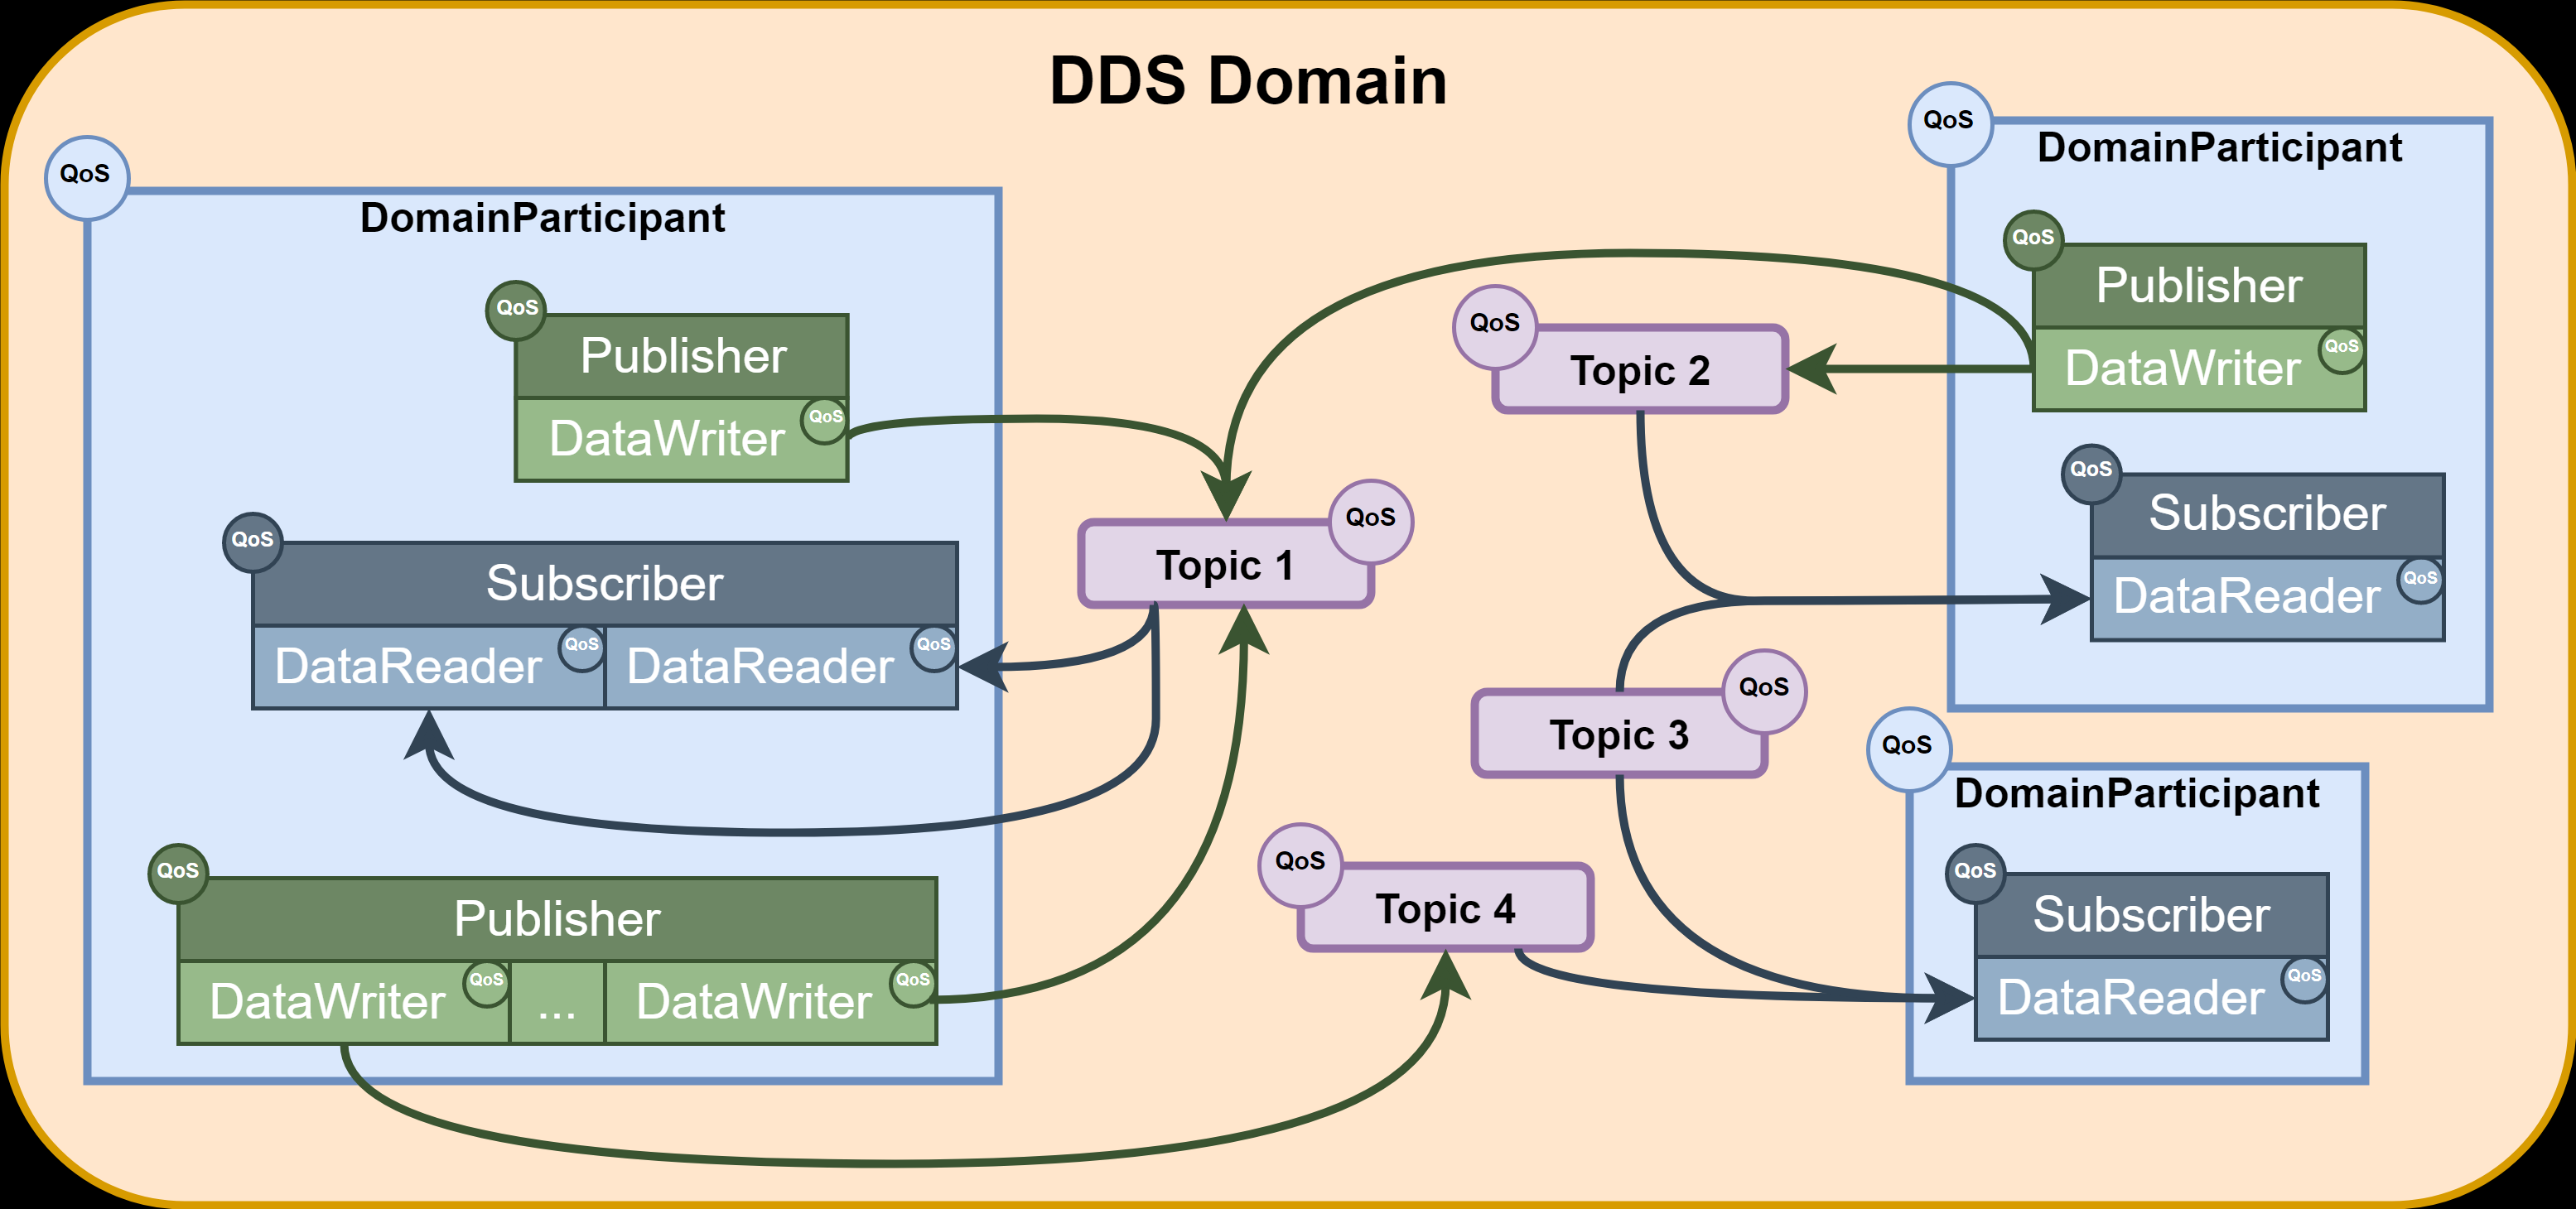 DCPS model entities in the DDS Domain